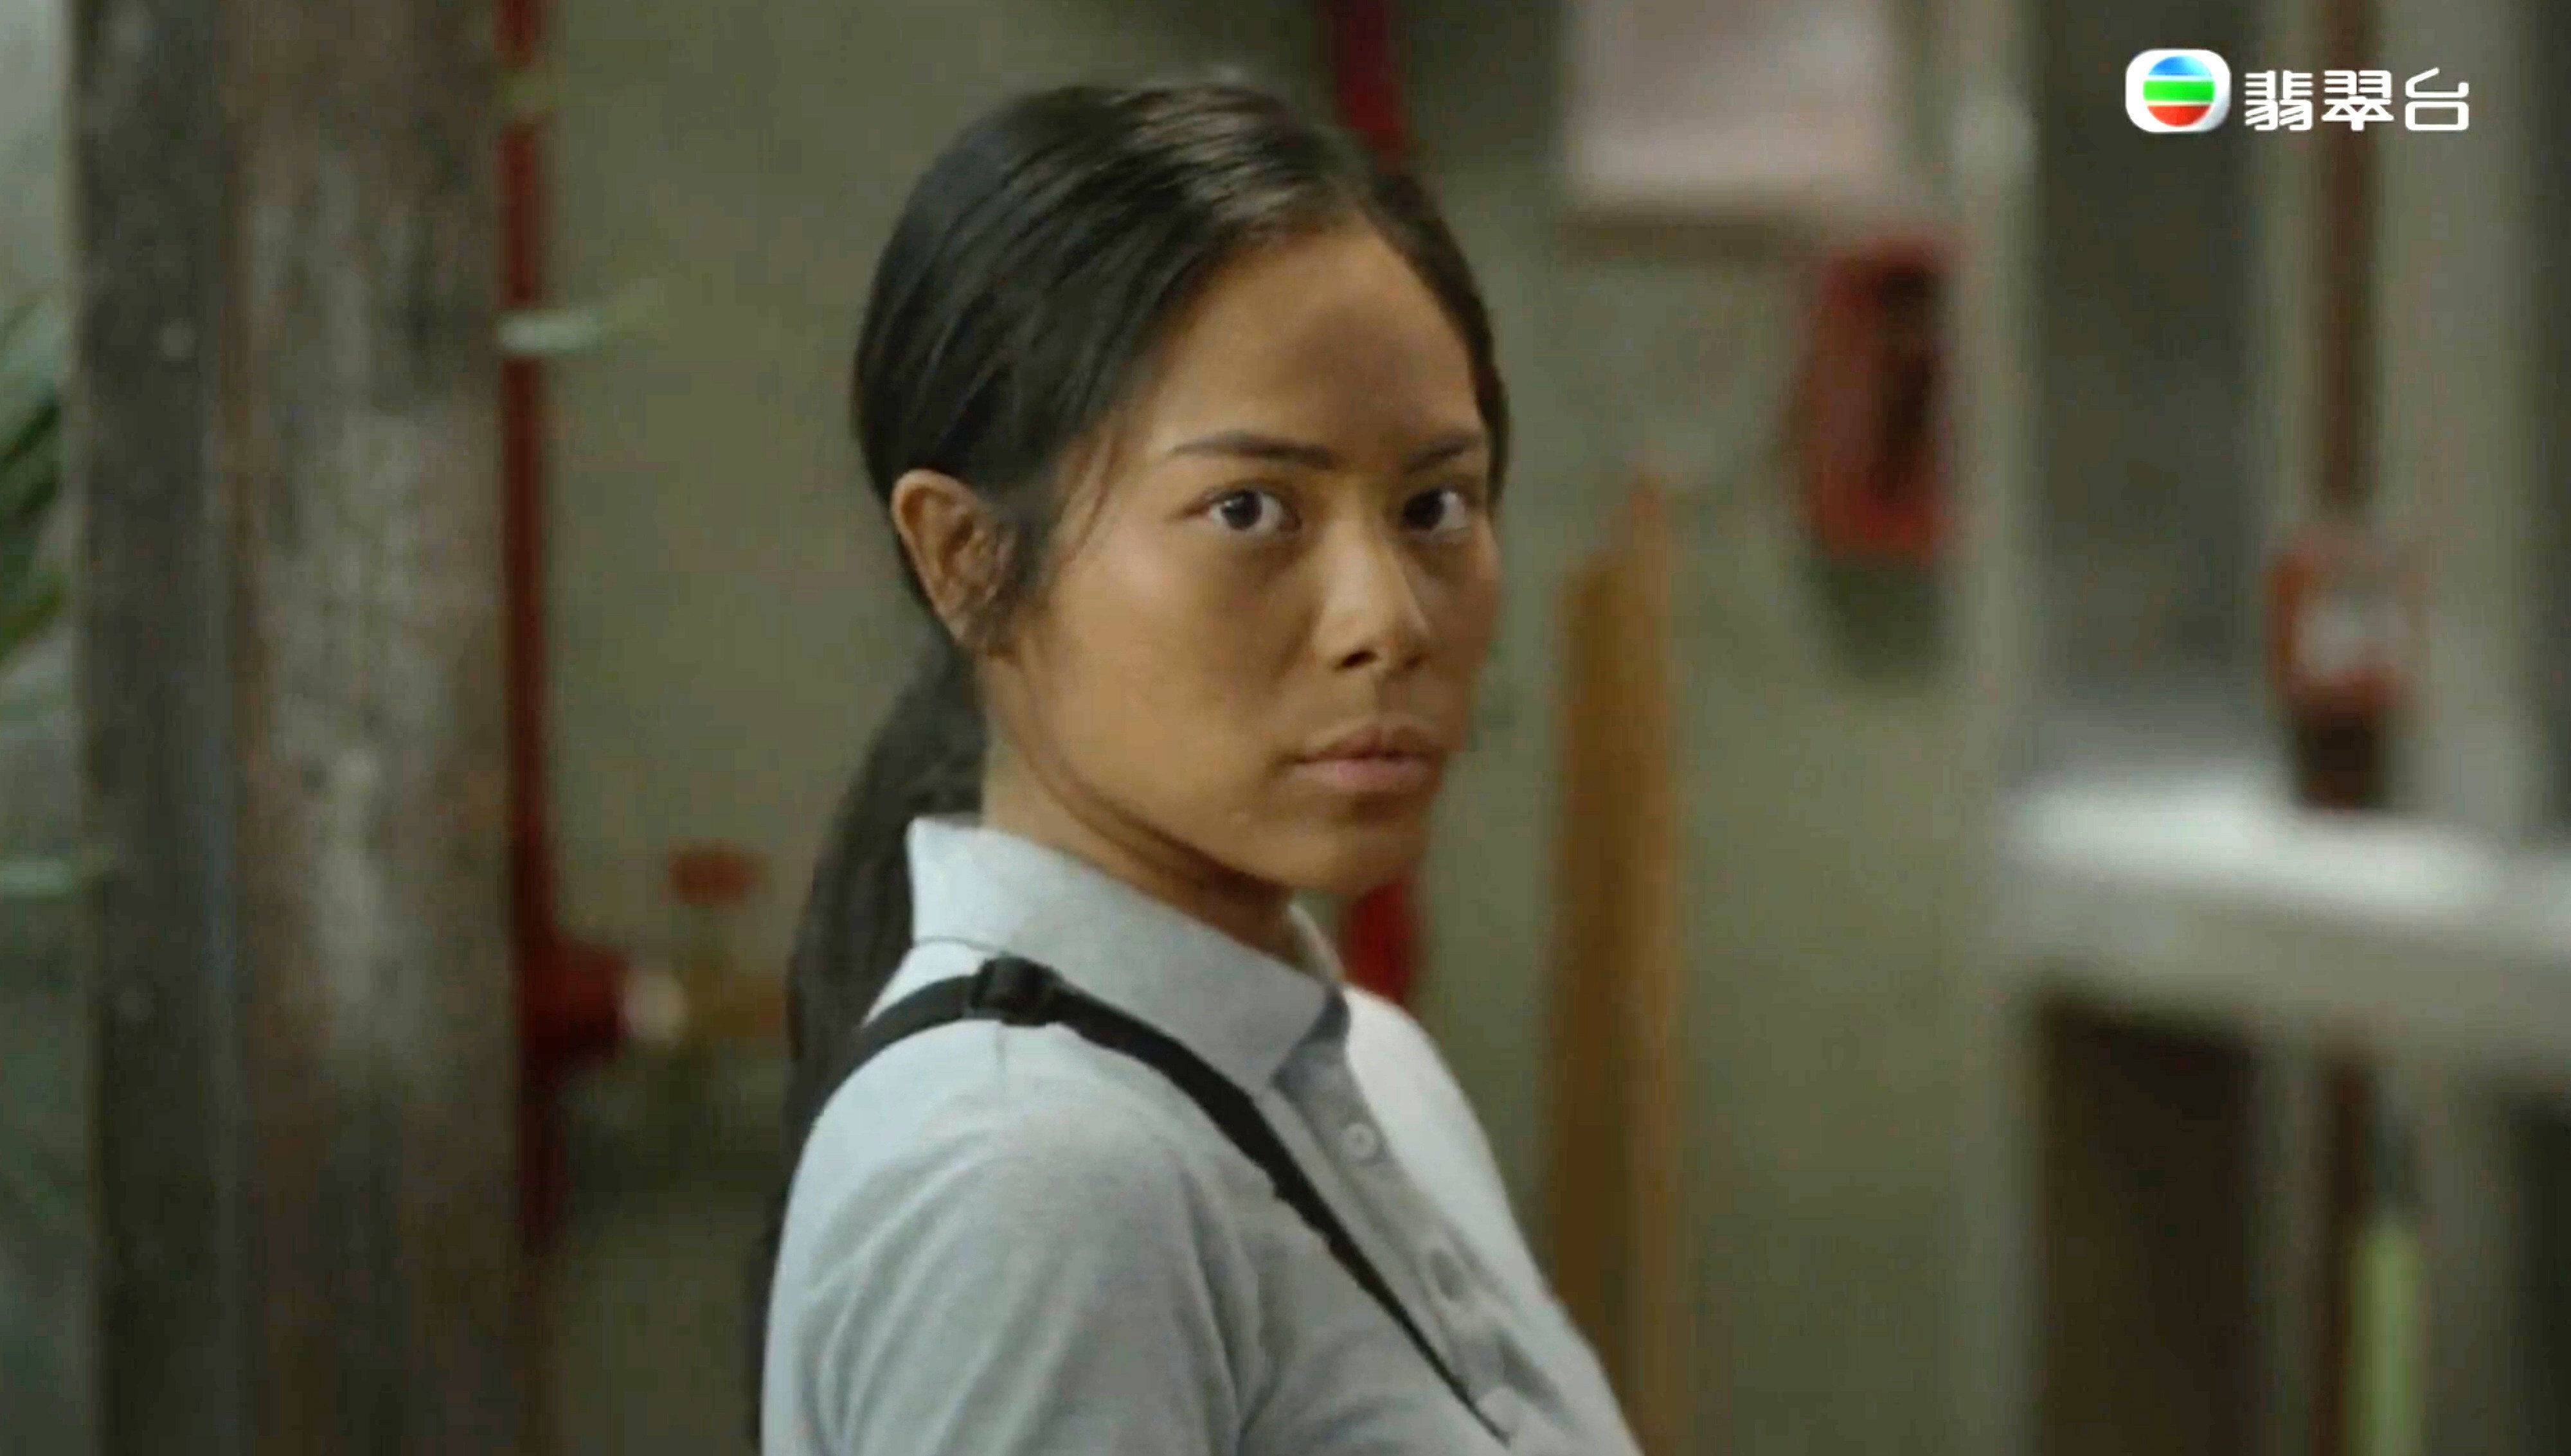 A television show featuring a Canadian-born Chinese actress Franchesca Wong, who darkened her skin to portray a Filipino foreign domestic worker, has prompted criticisms of Hong Kong’s depiction of minorities in mainstream entertainment. Photo: TVB